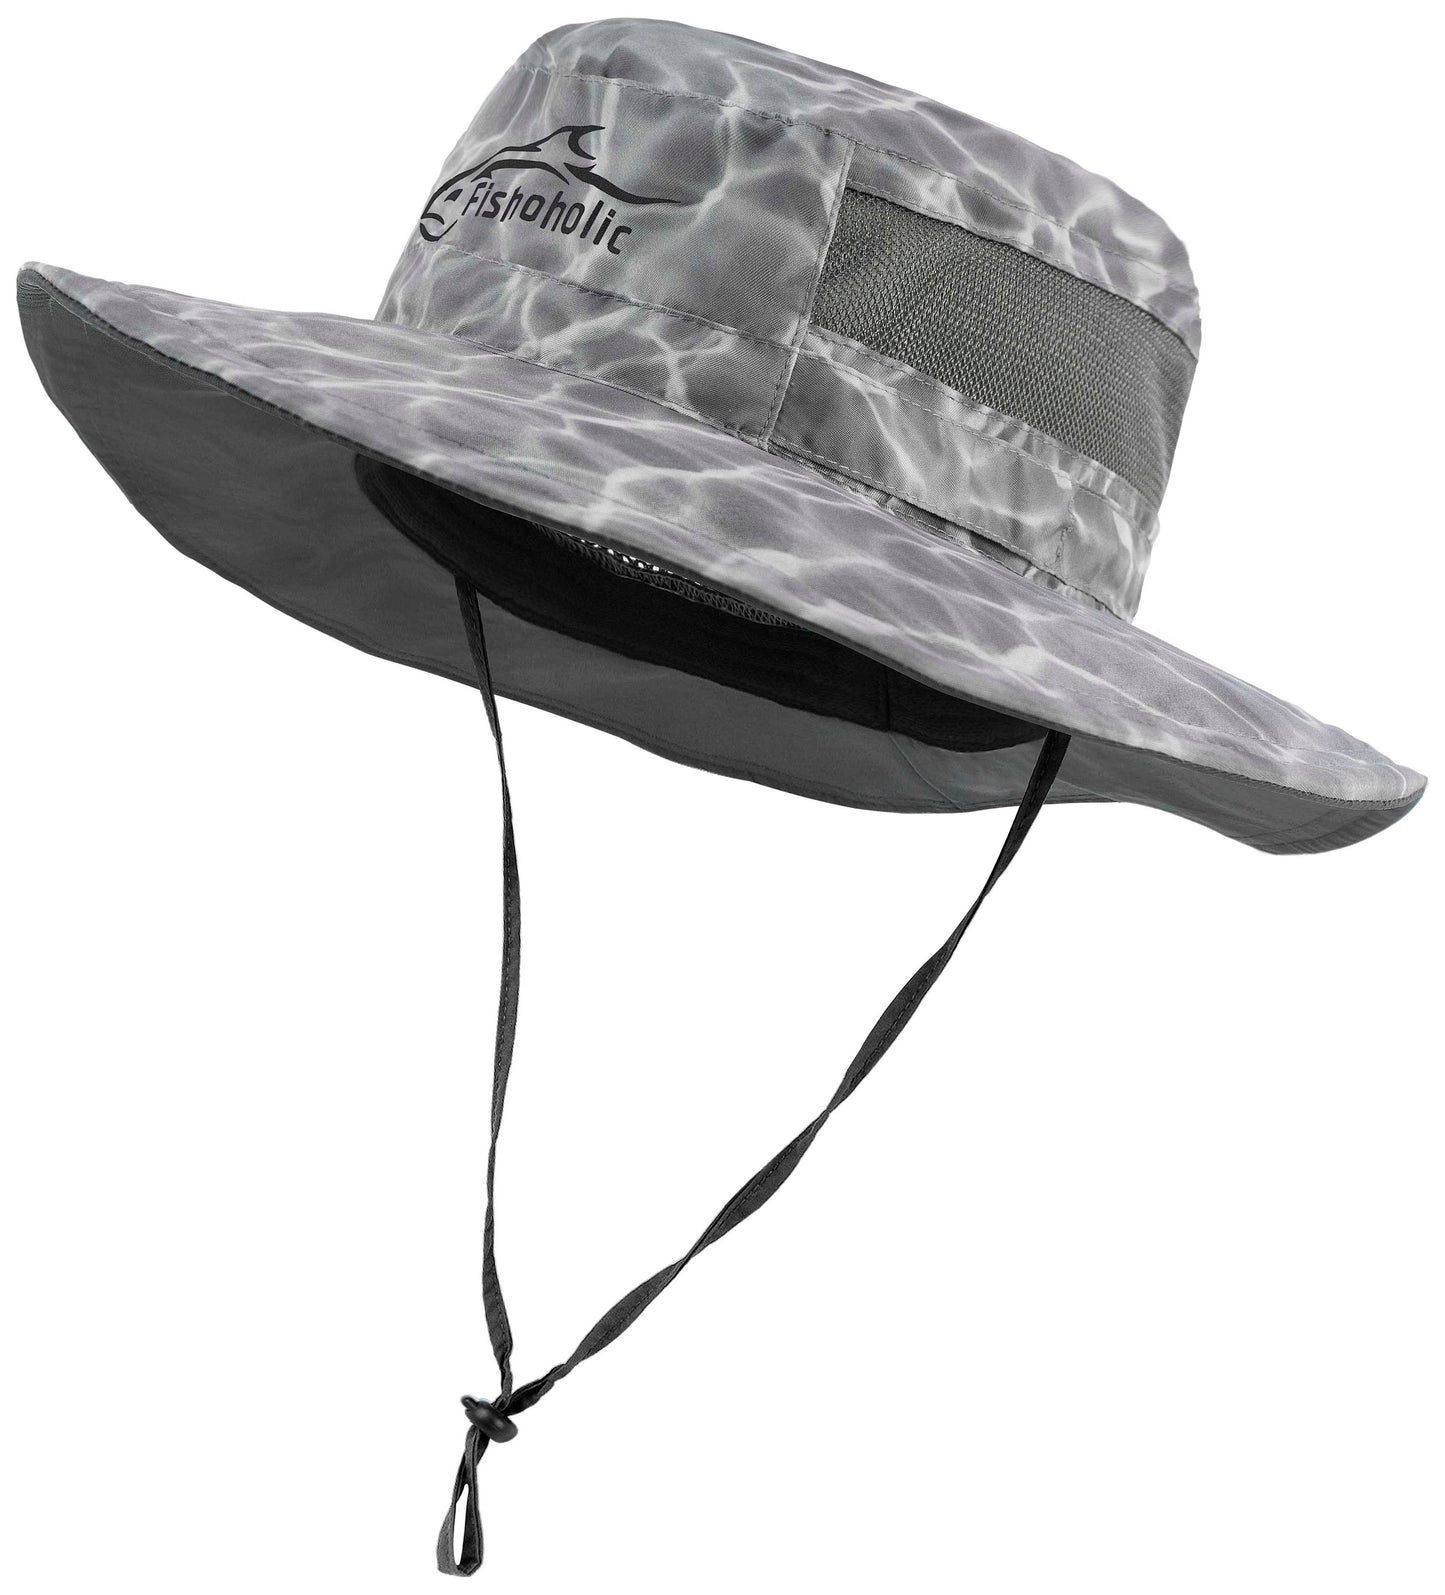 Fishoholic Fishing Hat - Bucket Boonie Hat - S/M or L/XL - Breathable Mesh  & 2 Adjustable Neck & Head Straps - UPF50+ Sun Protection Wide Brim Hat or  Sun Hat (R)TM